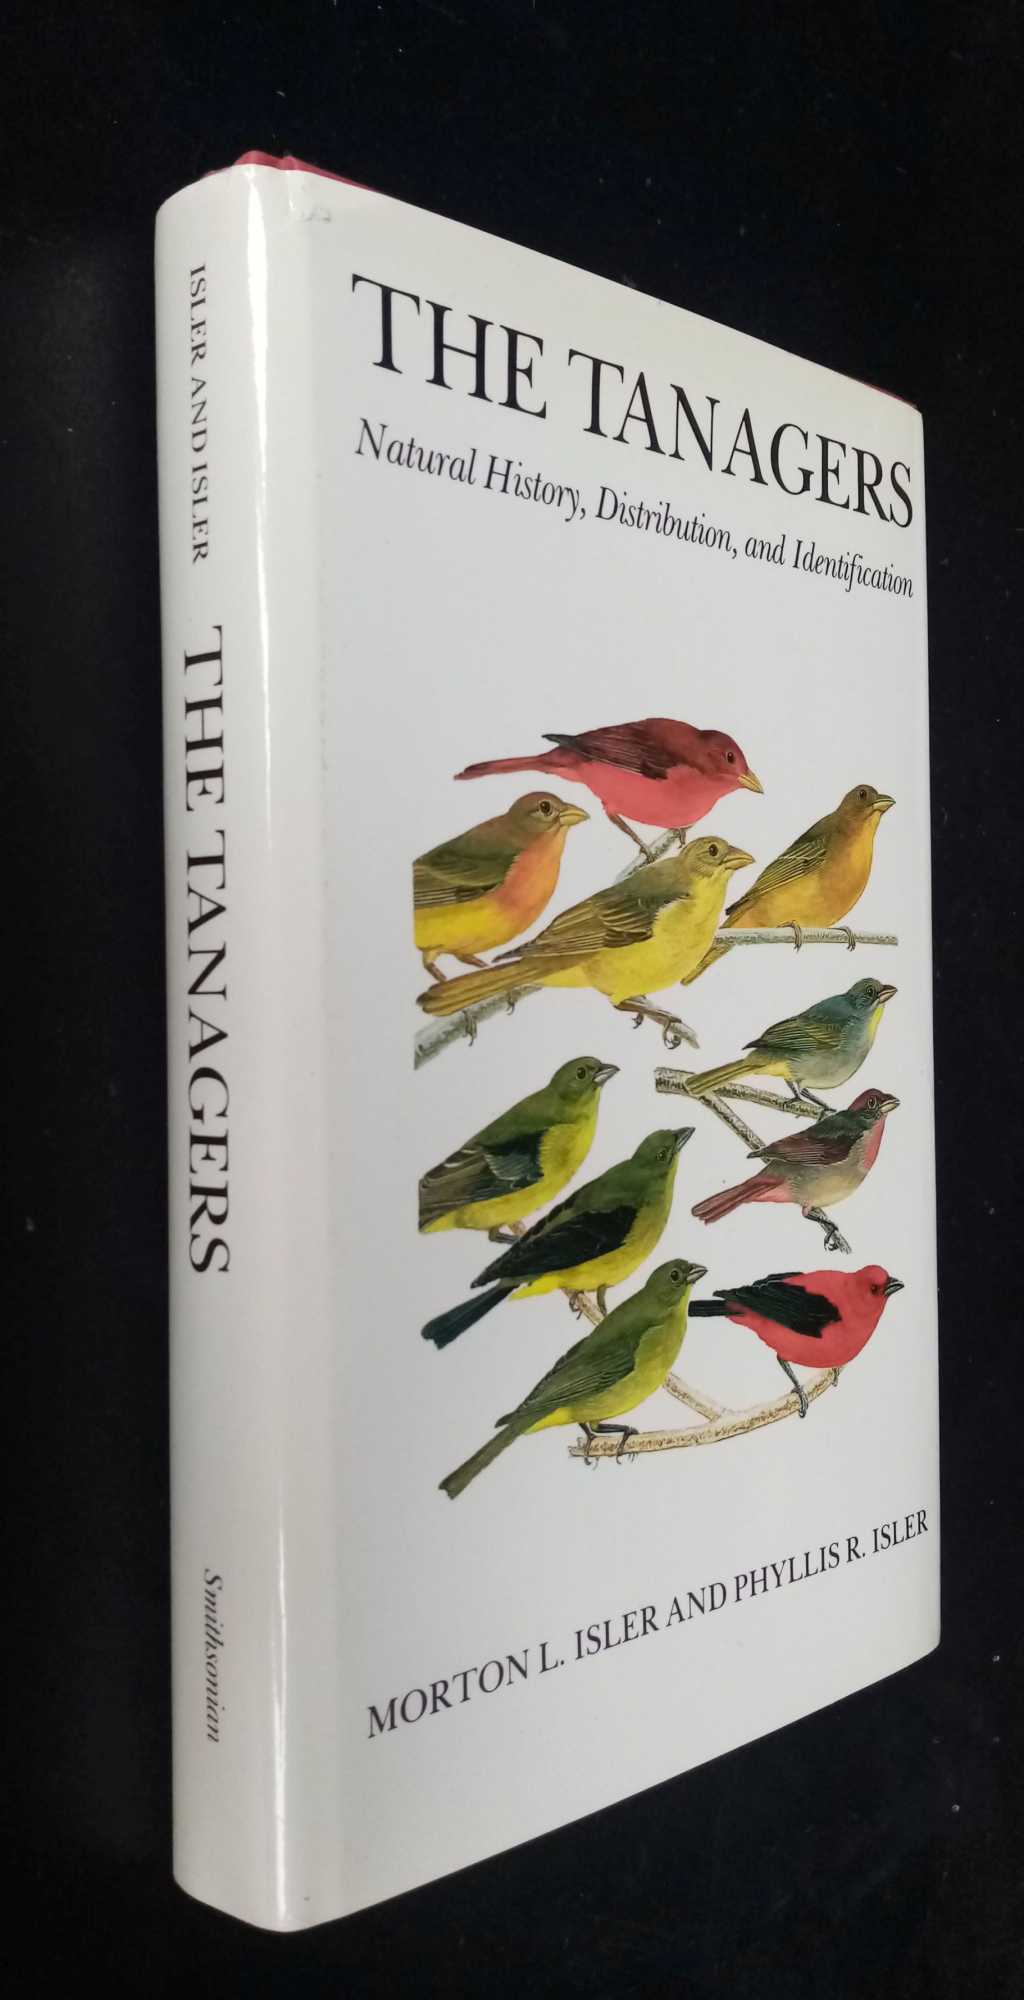 Morton &  Phyllis Isler - The Tanagers: Natural History, Distribution and Indentification